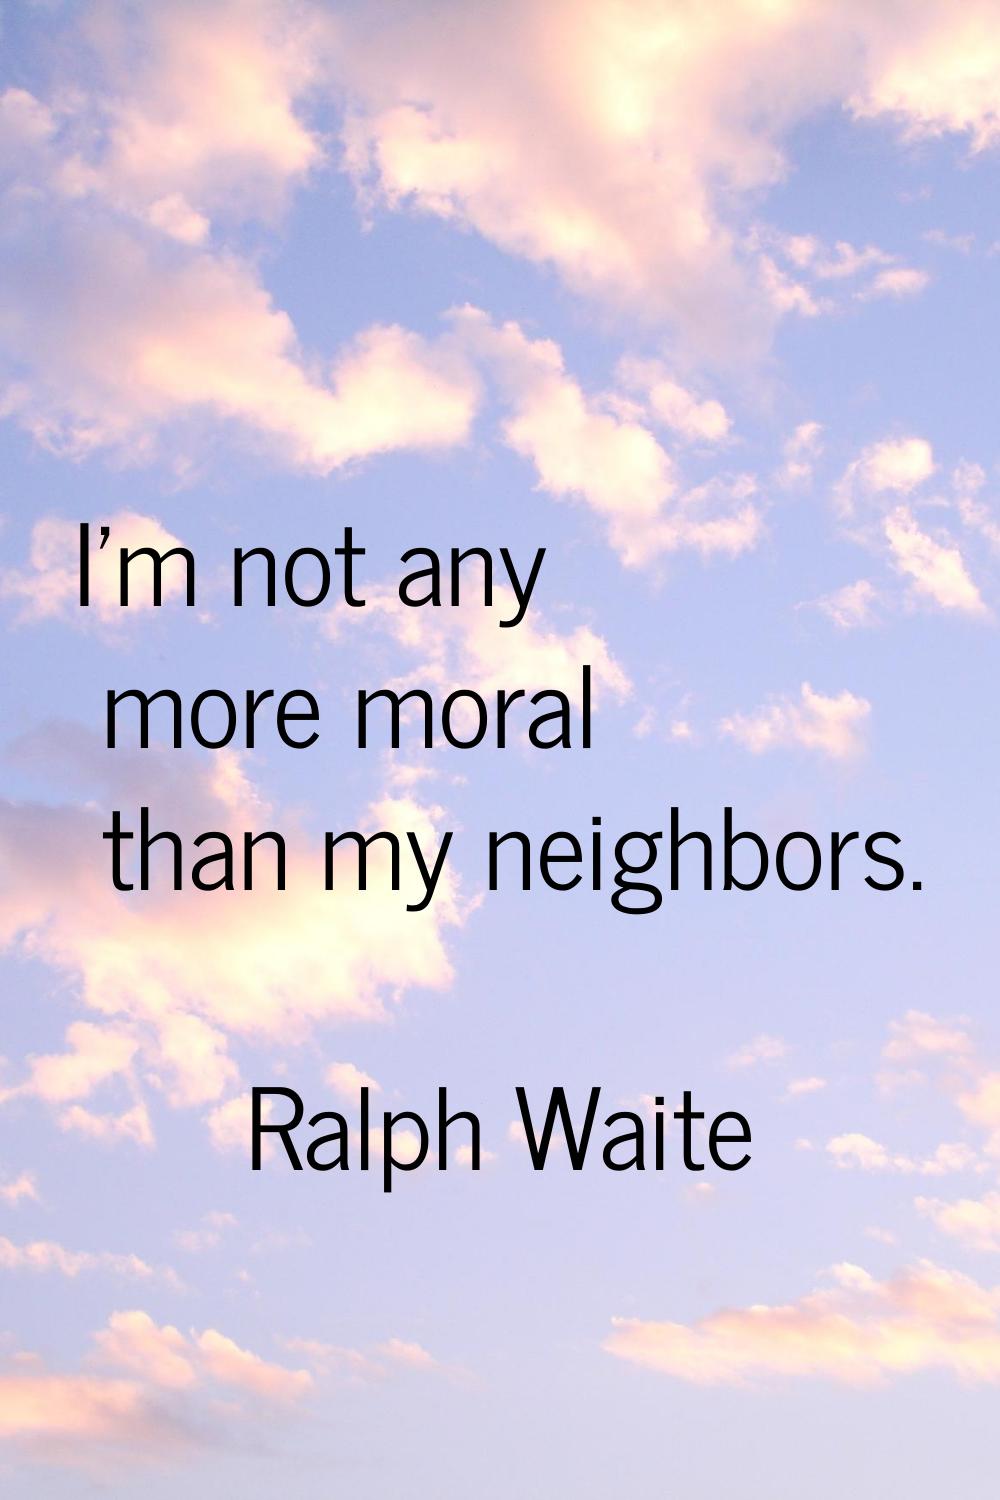 I'm not any more moral than my neighbors.